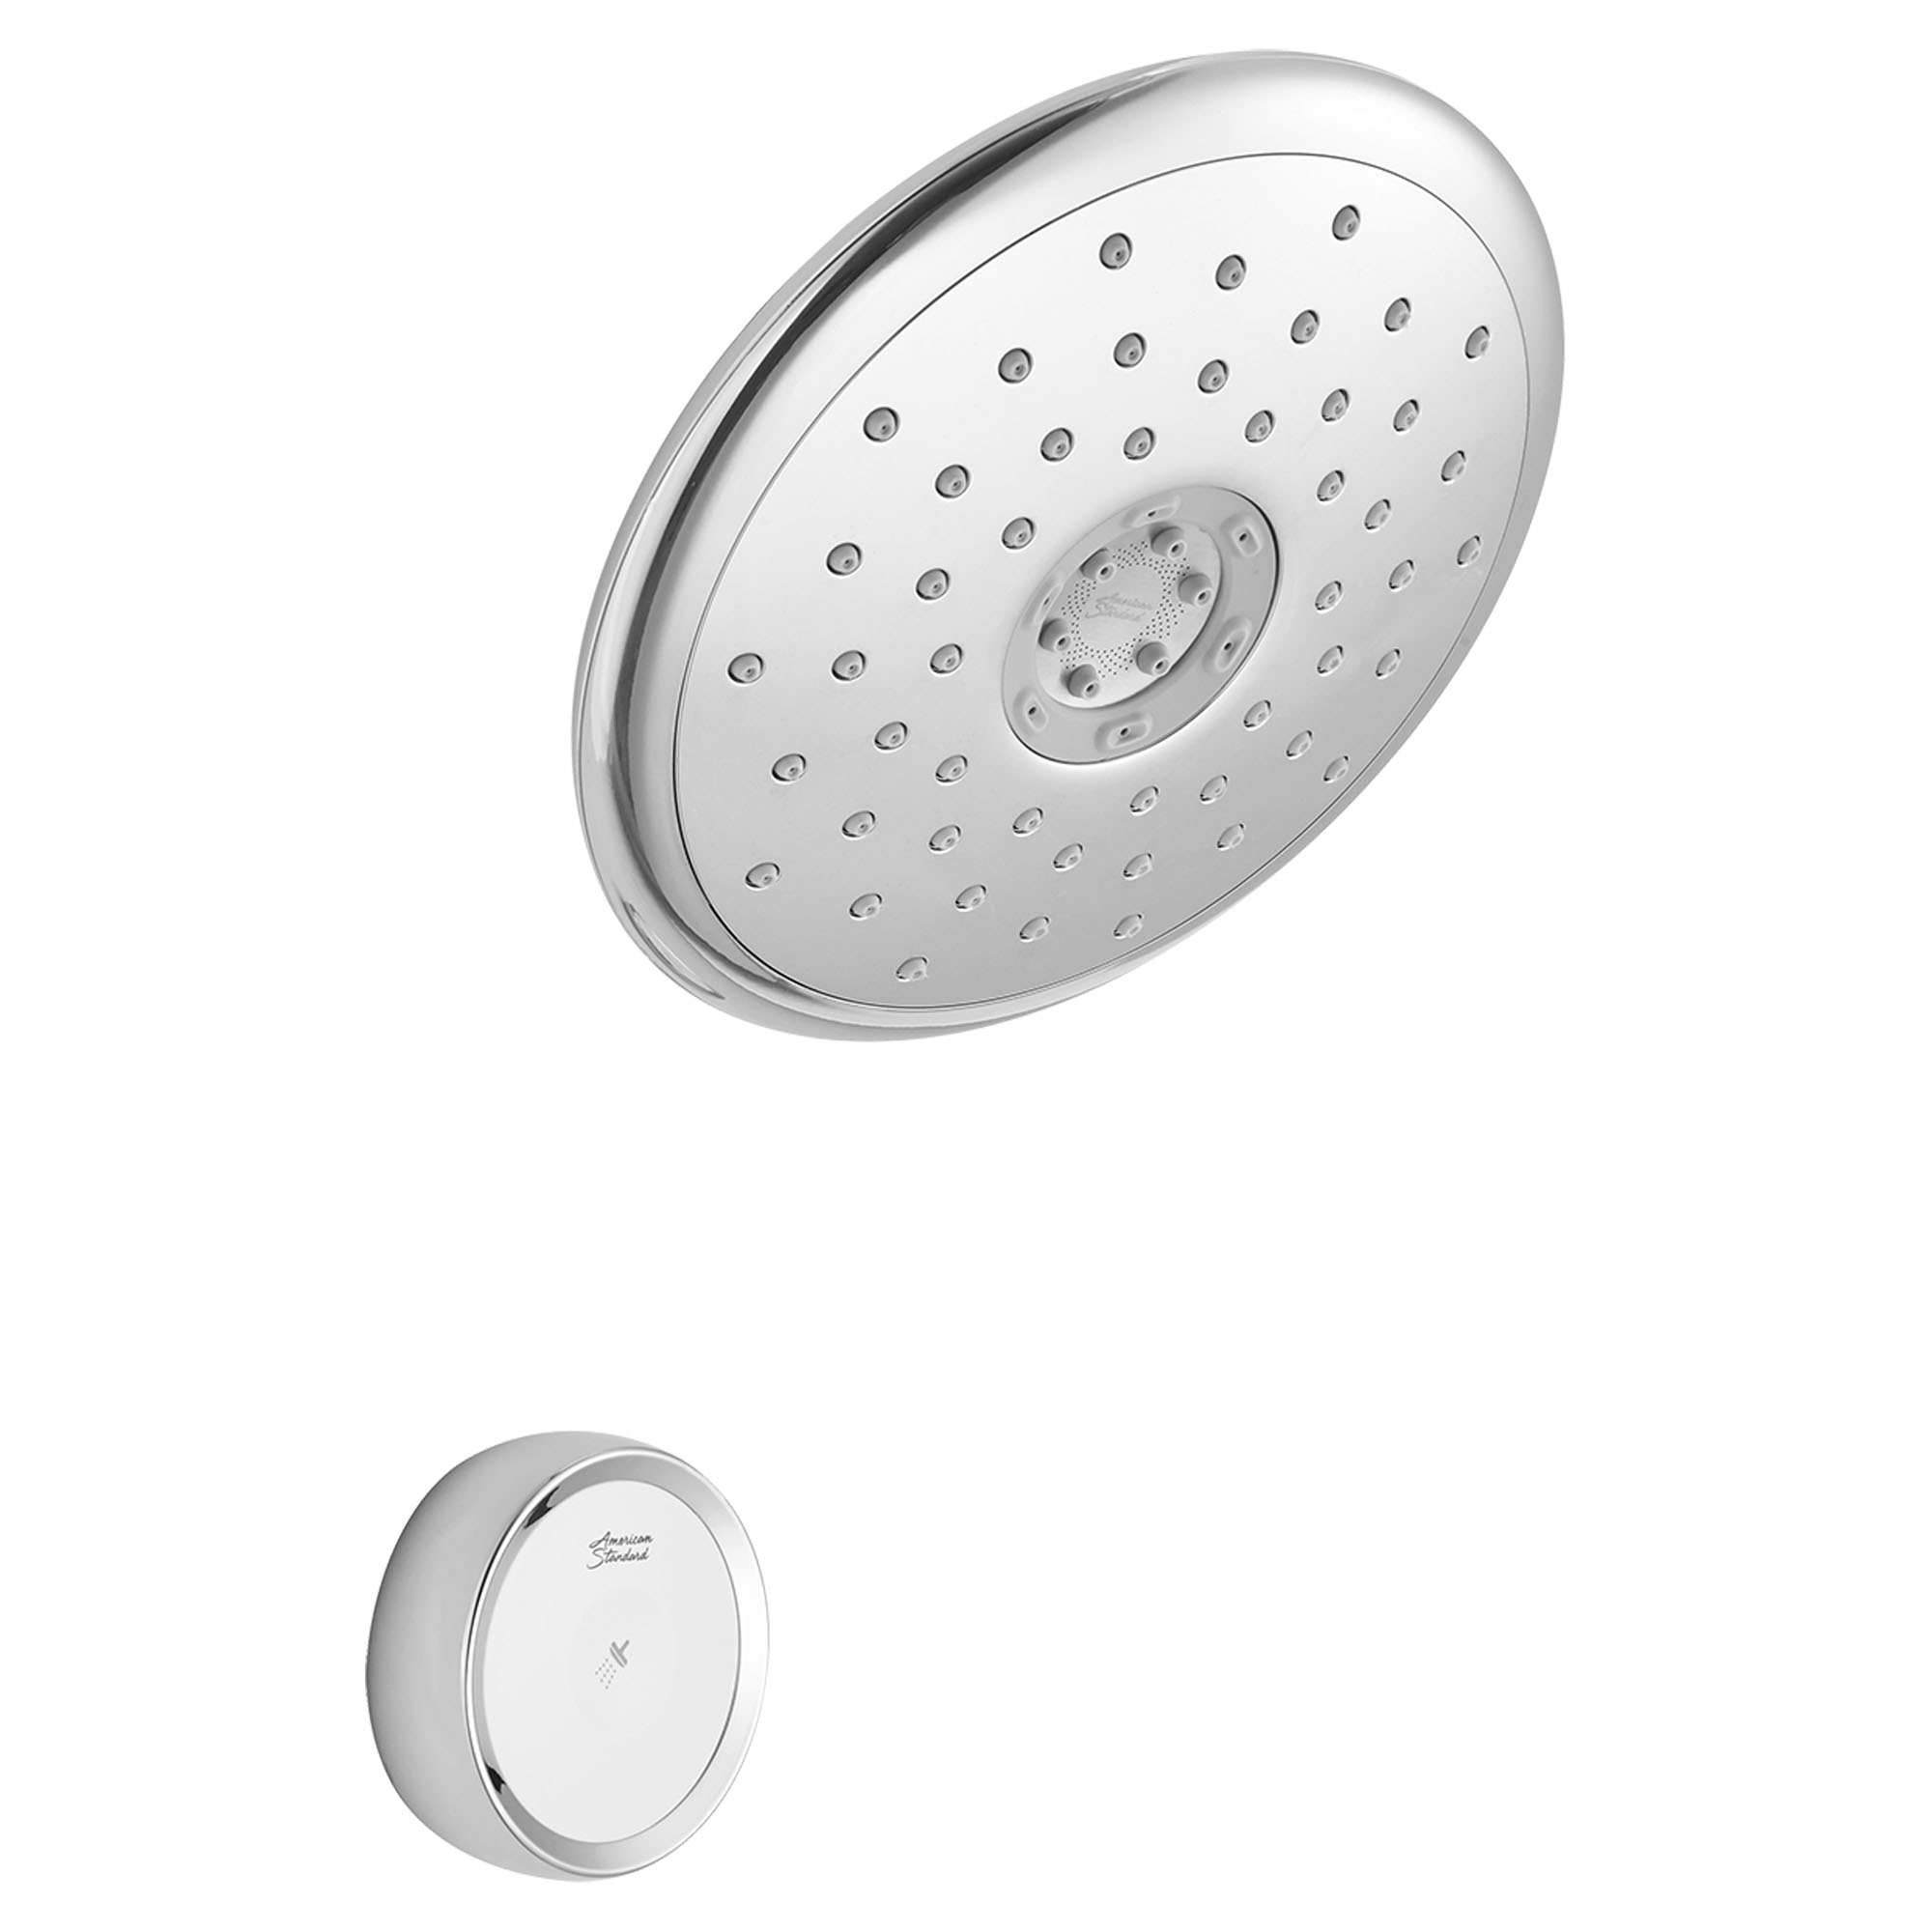 Spectra™ eTouch 7-Inch 2.5 gpm/9.5 L/min Fixed Showerhead